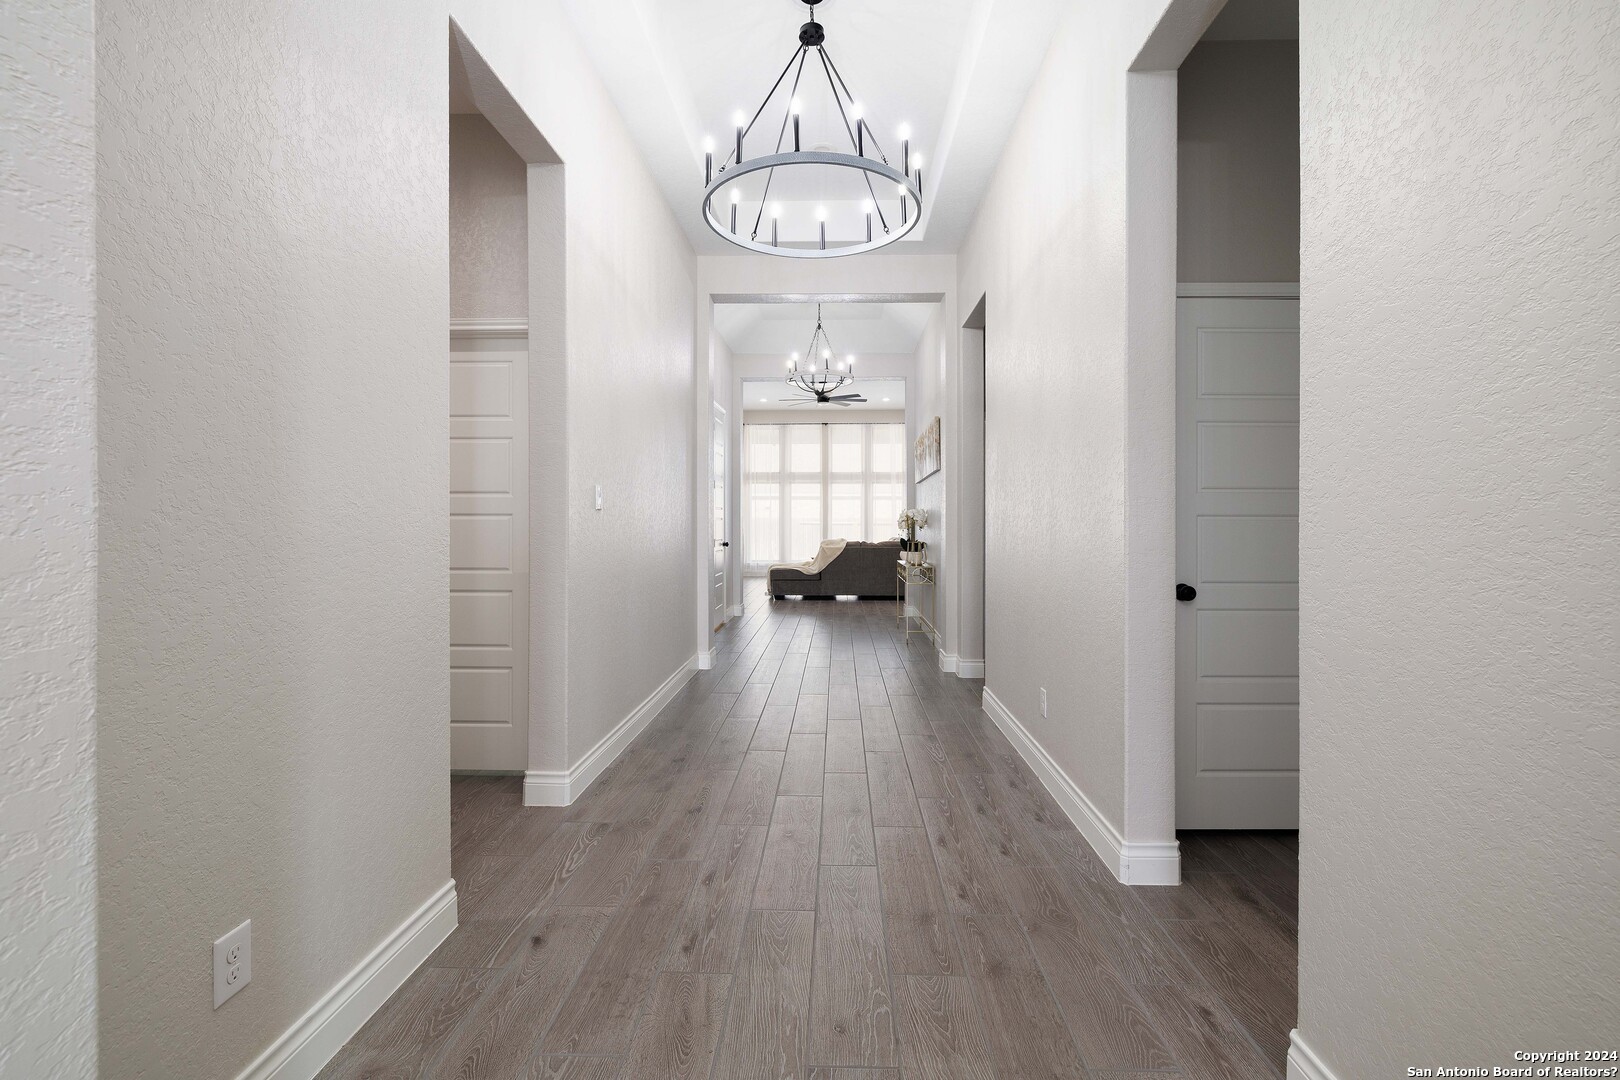 a view of a hallway with wooden floor and a chandelier